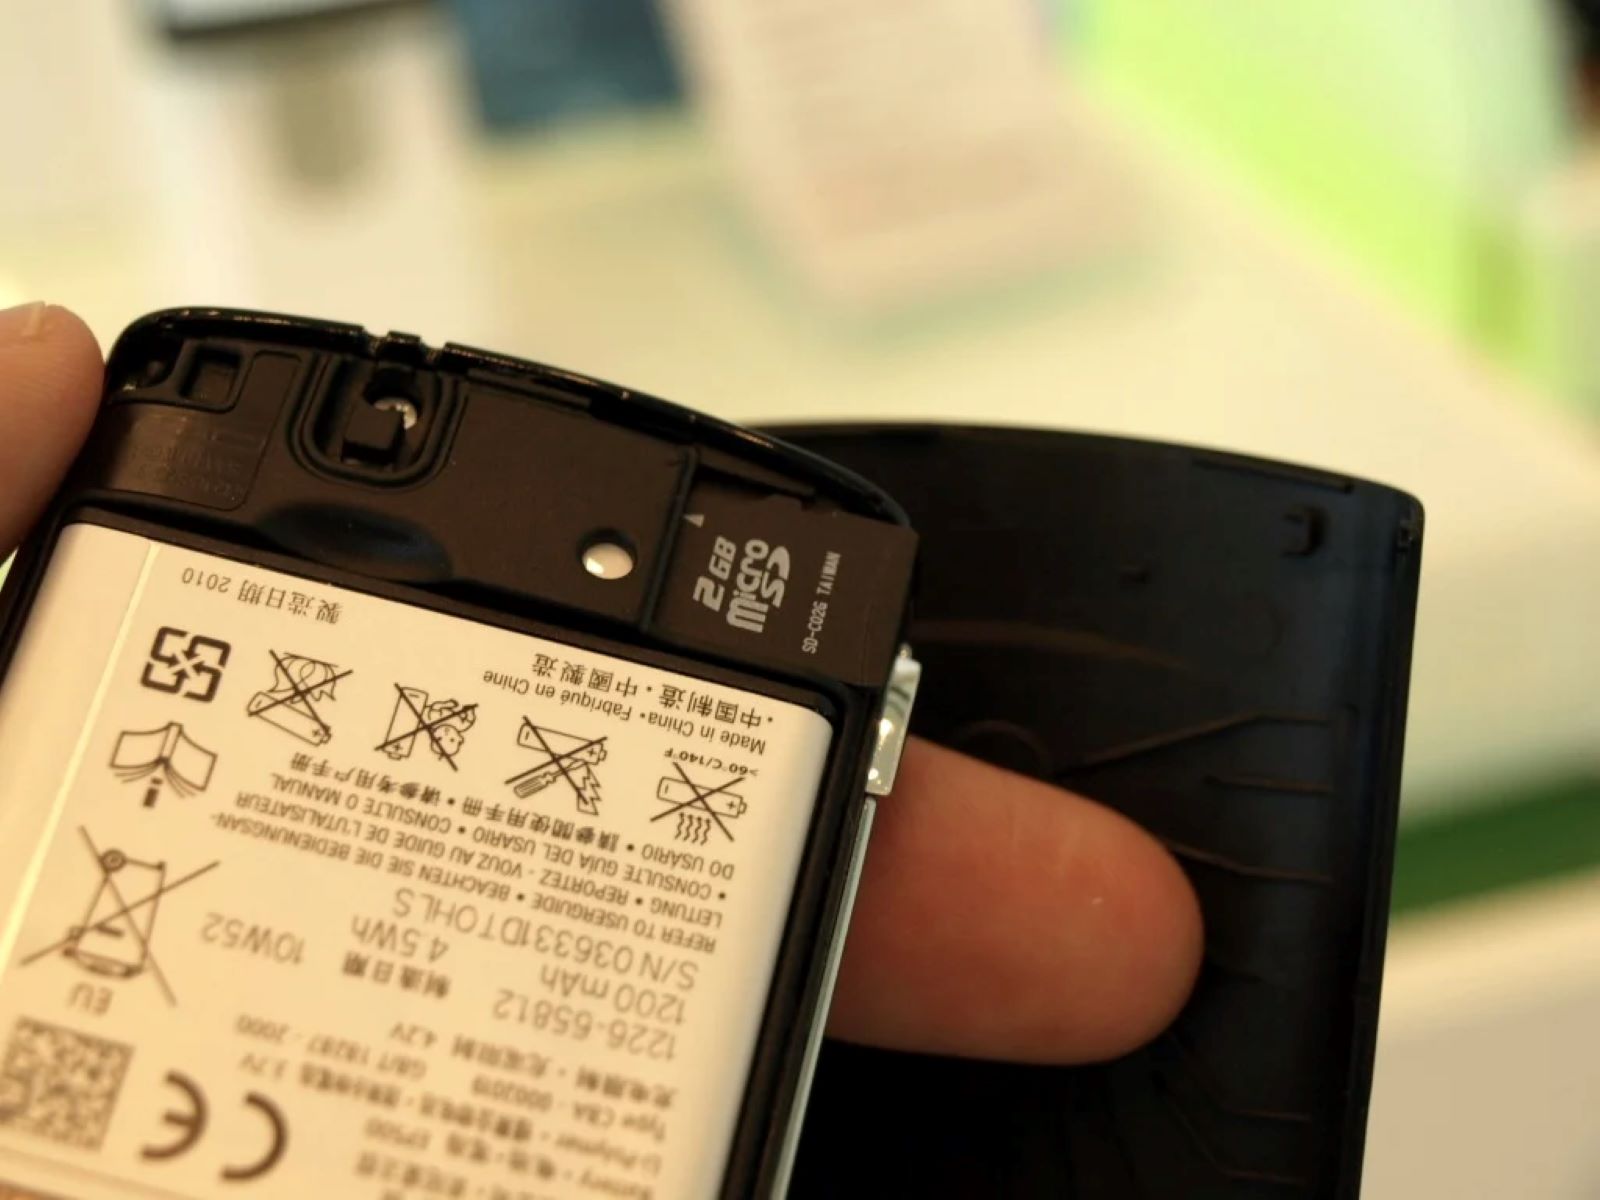 safely-removing-battery-from-sony-xperia-mini